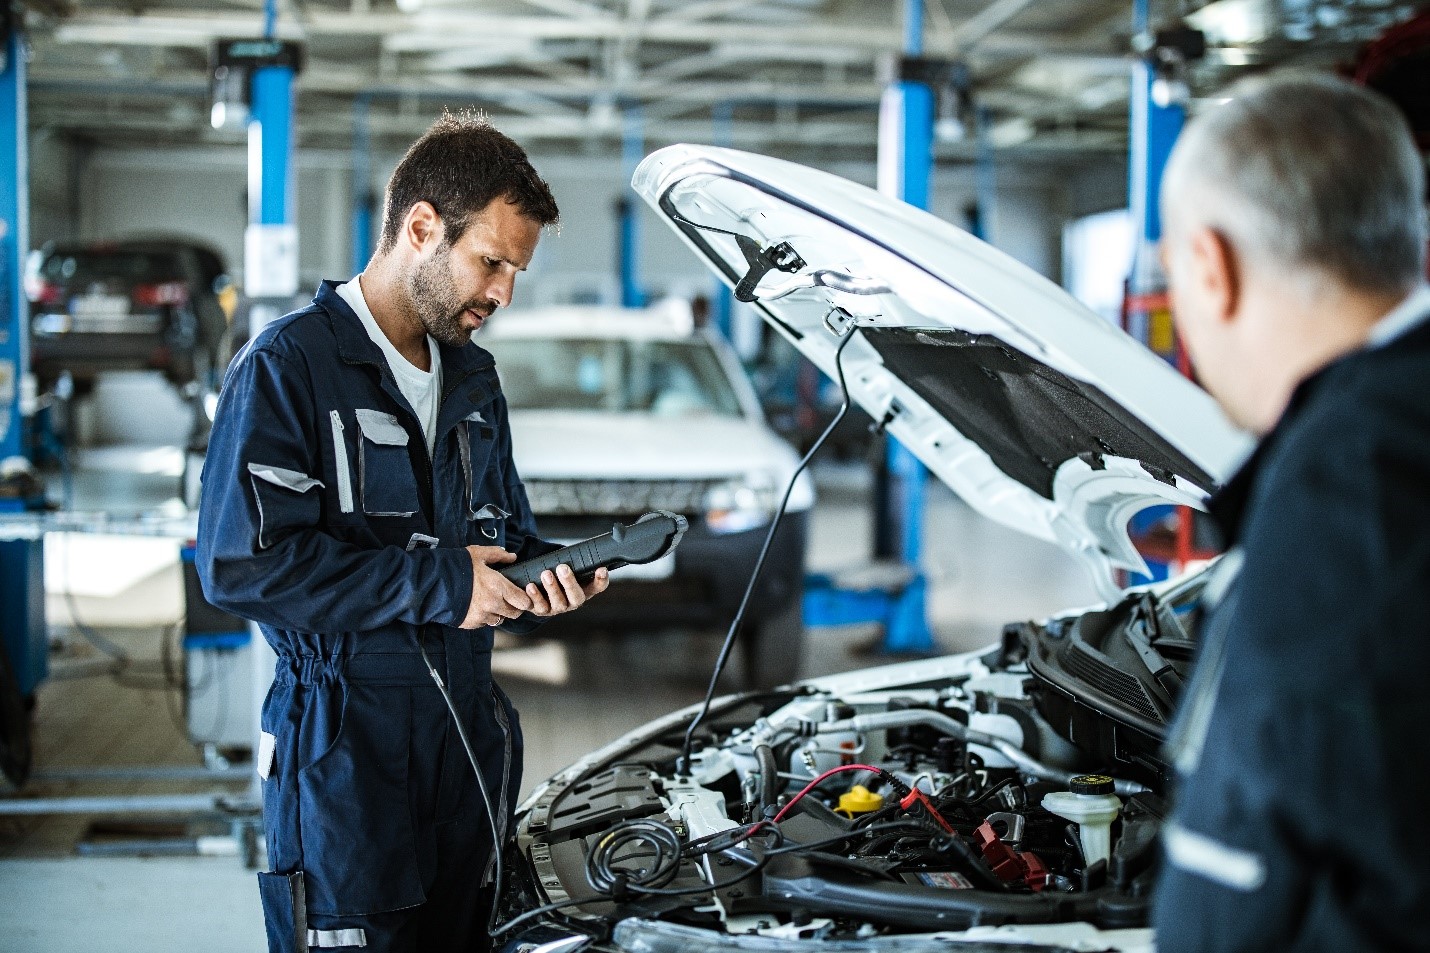 Toyota preferred technician assesses the engine and collision damage on a Toyota